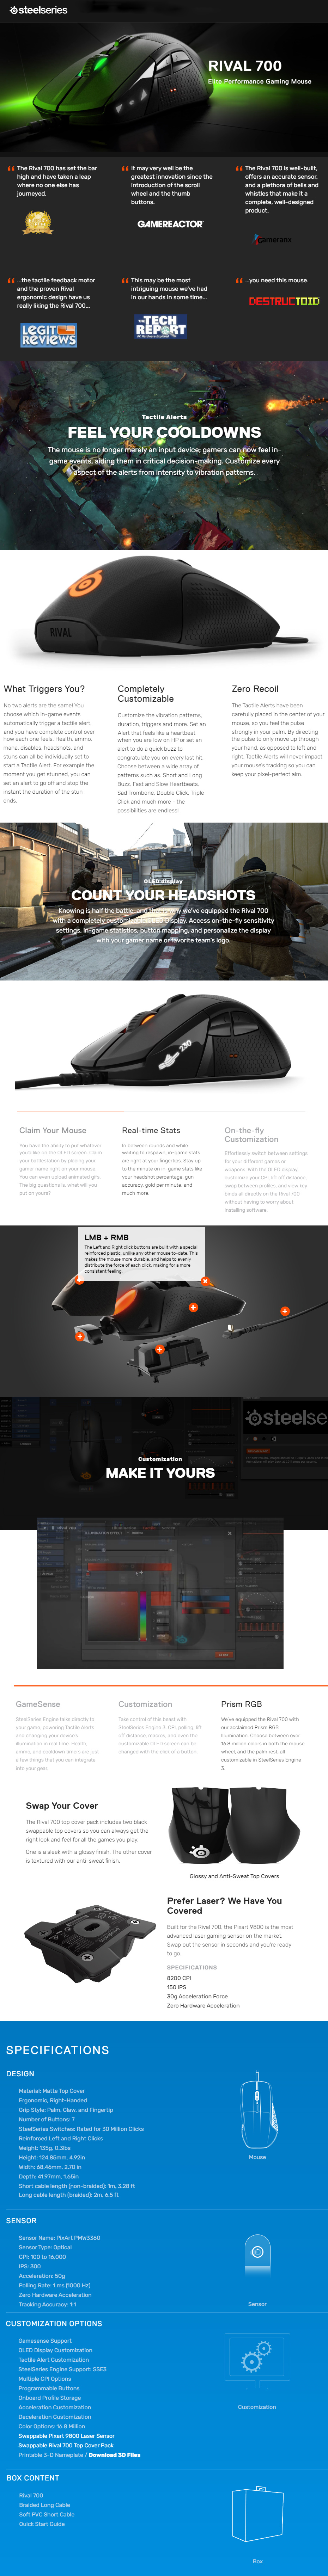 SteelSeries Rival 700 Mouse (62331)